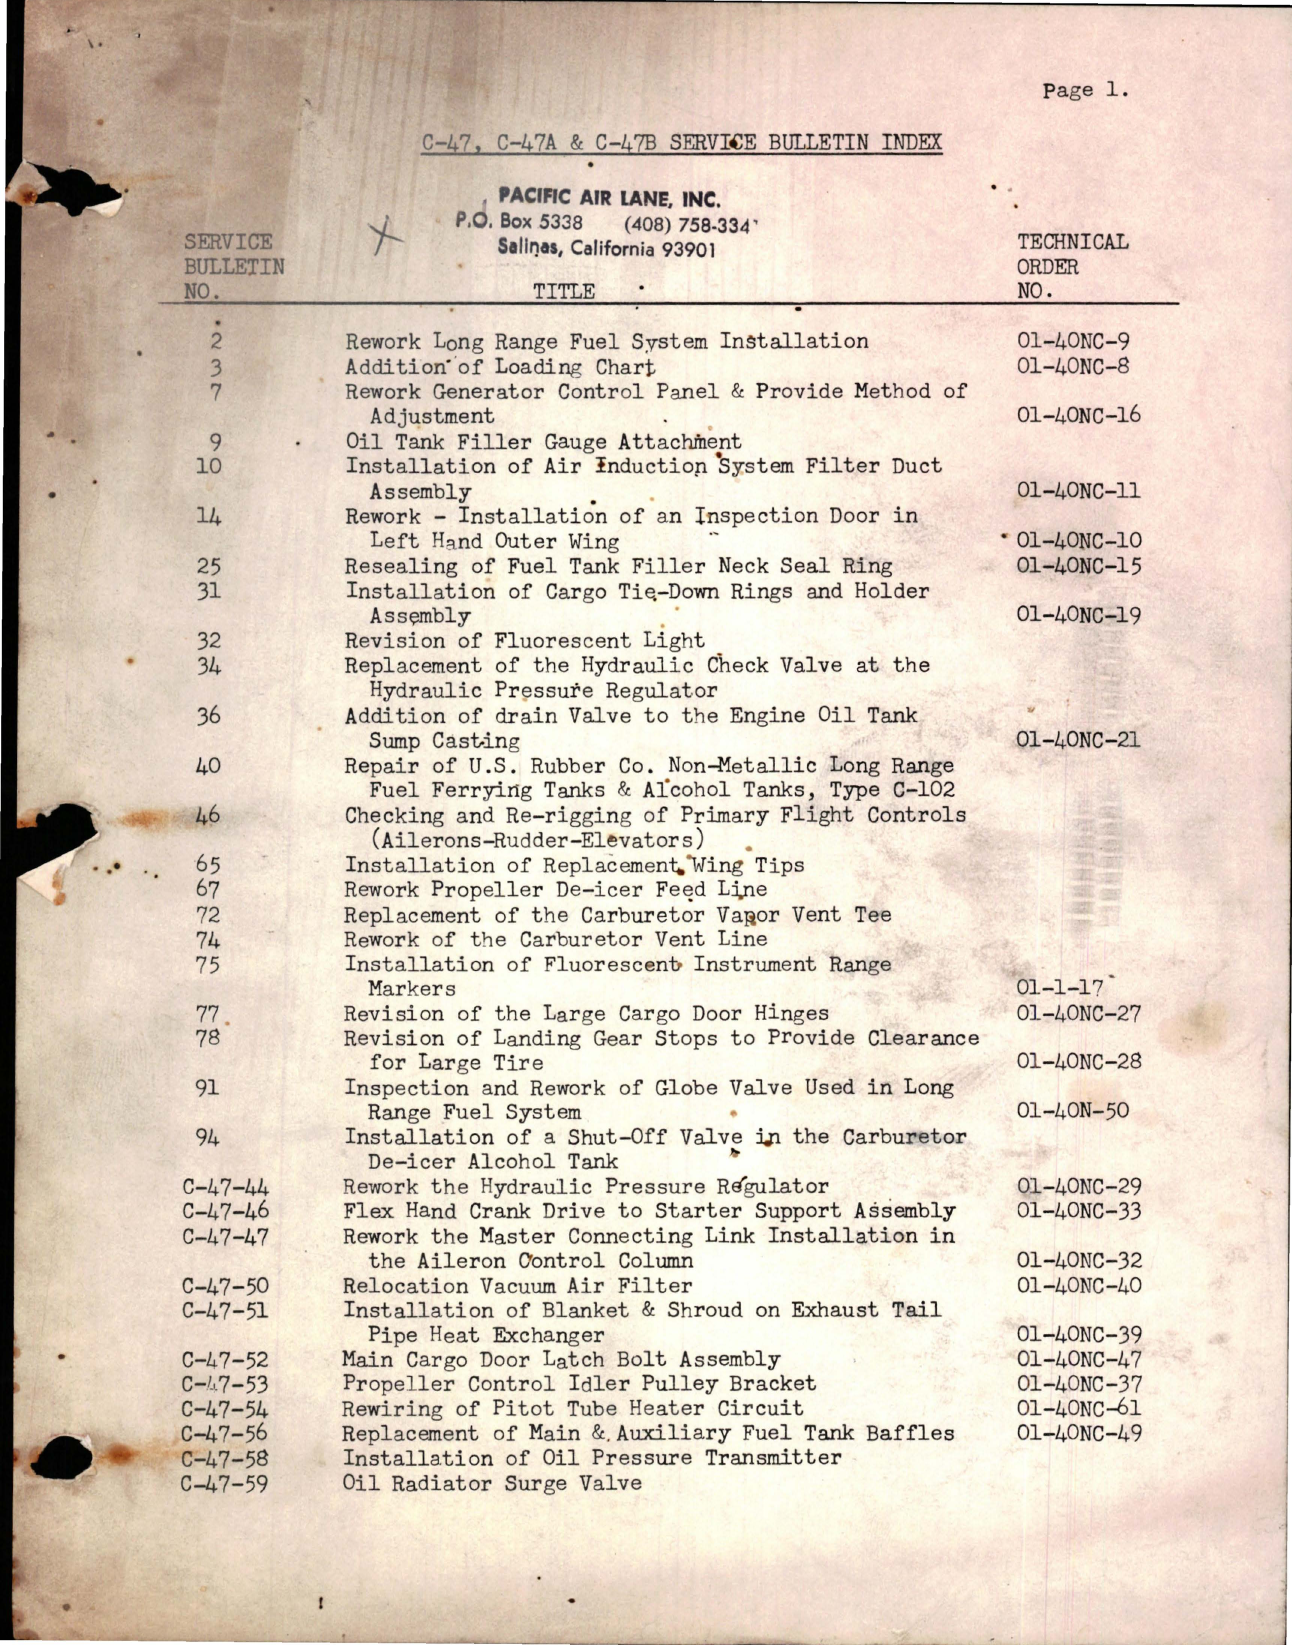 Sample page 1 from AirCorps Library document: Service Bulletin Index for C-47, C-47A & C-47B